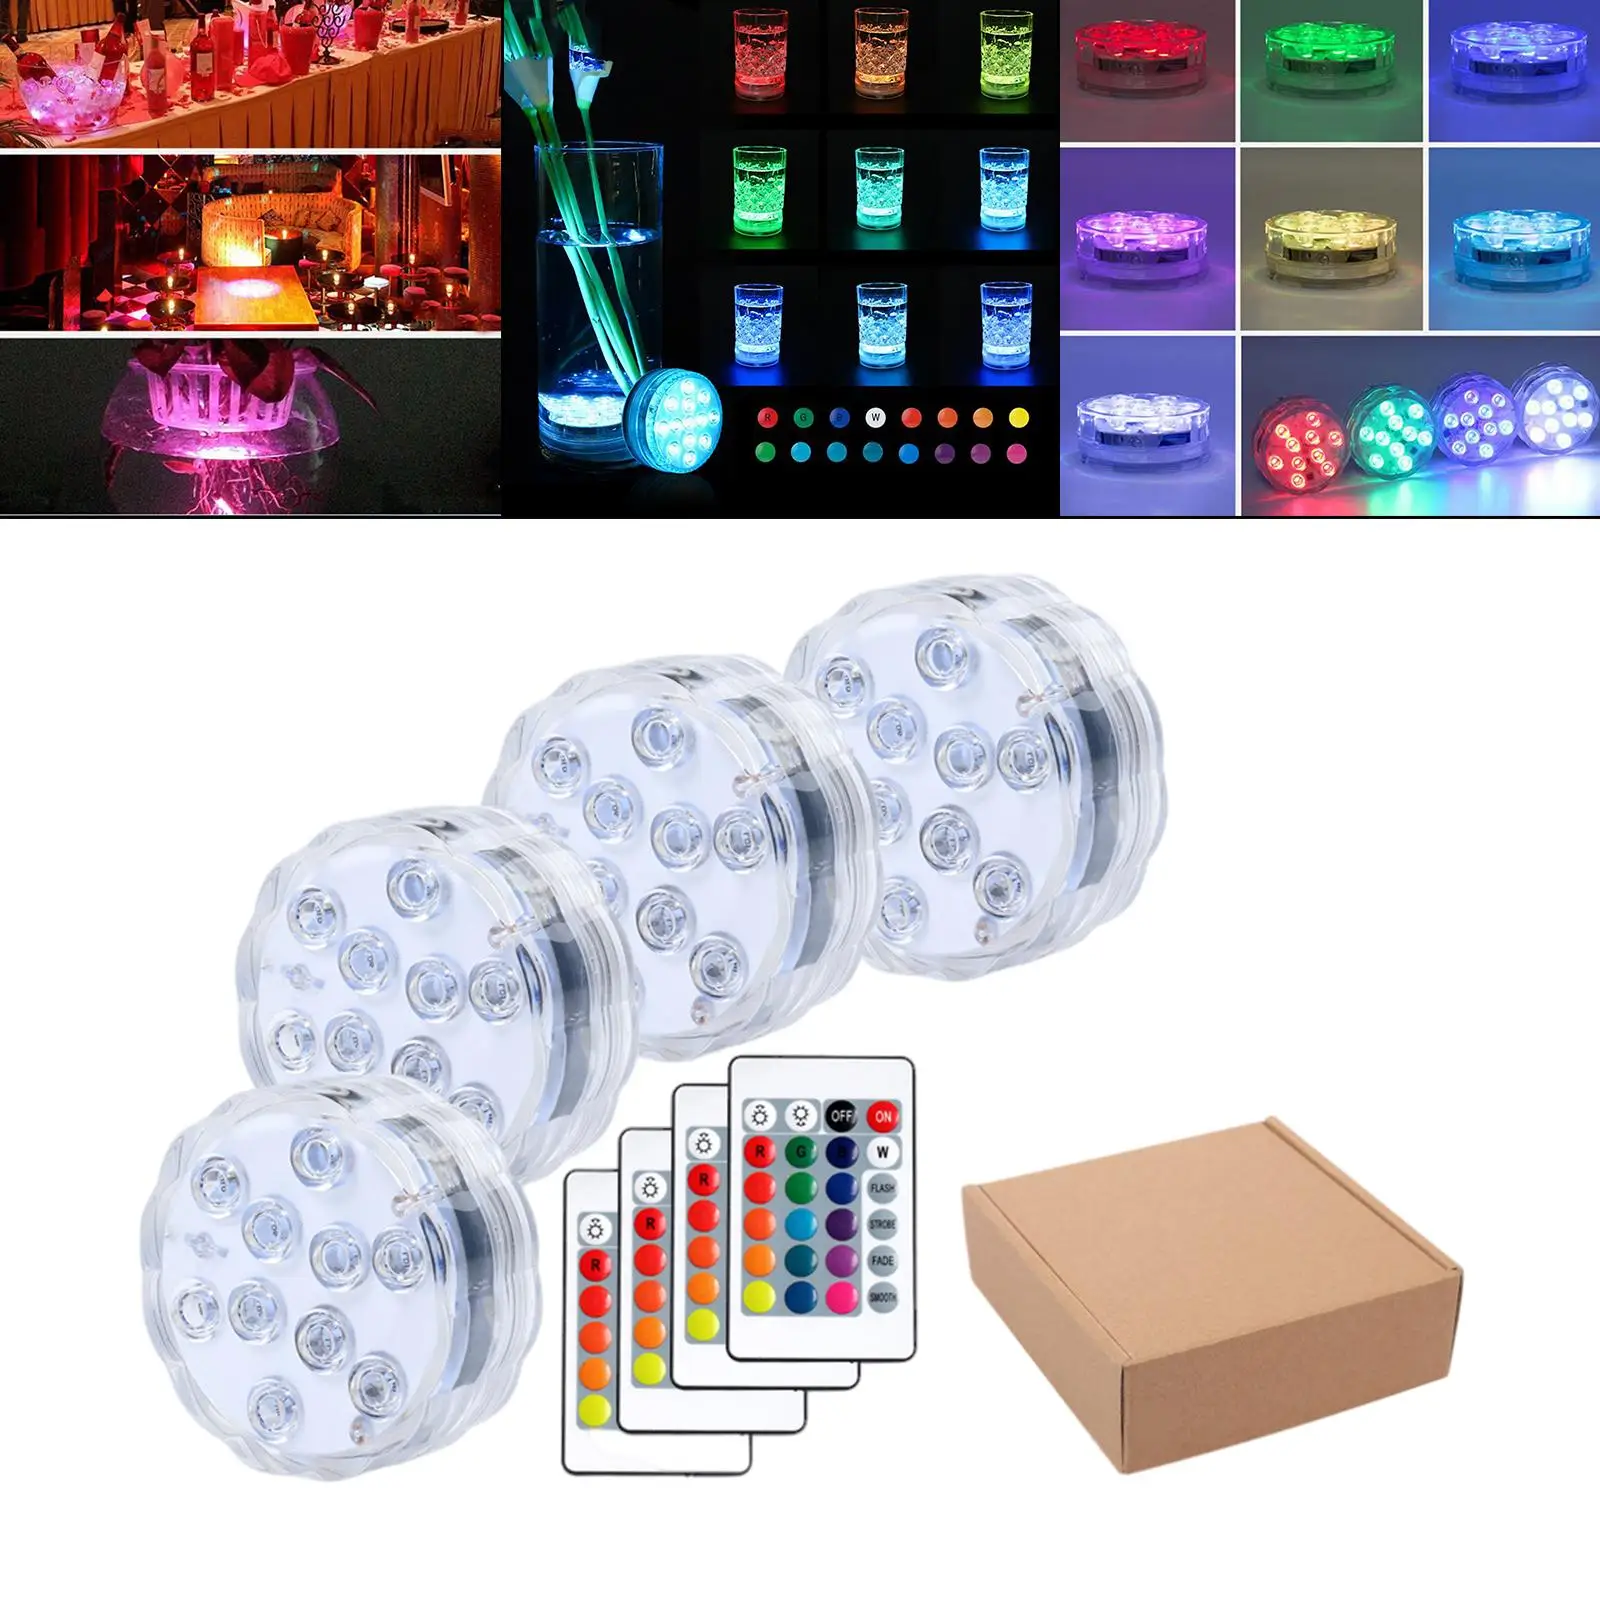 16-Color RGB Submersible LED Lights Waterproof Pools Remote Lights